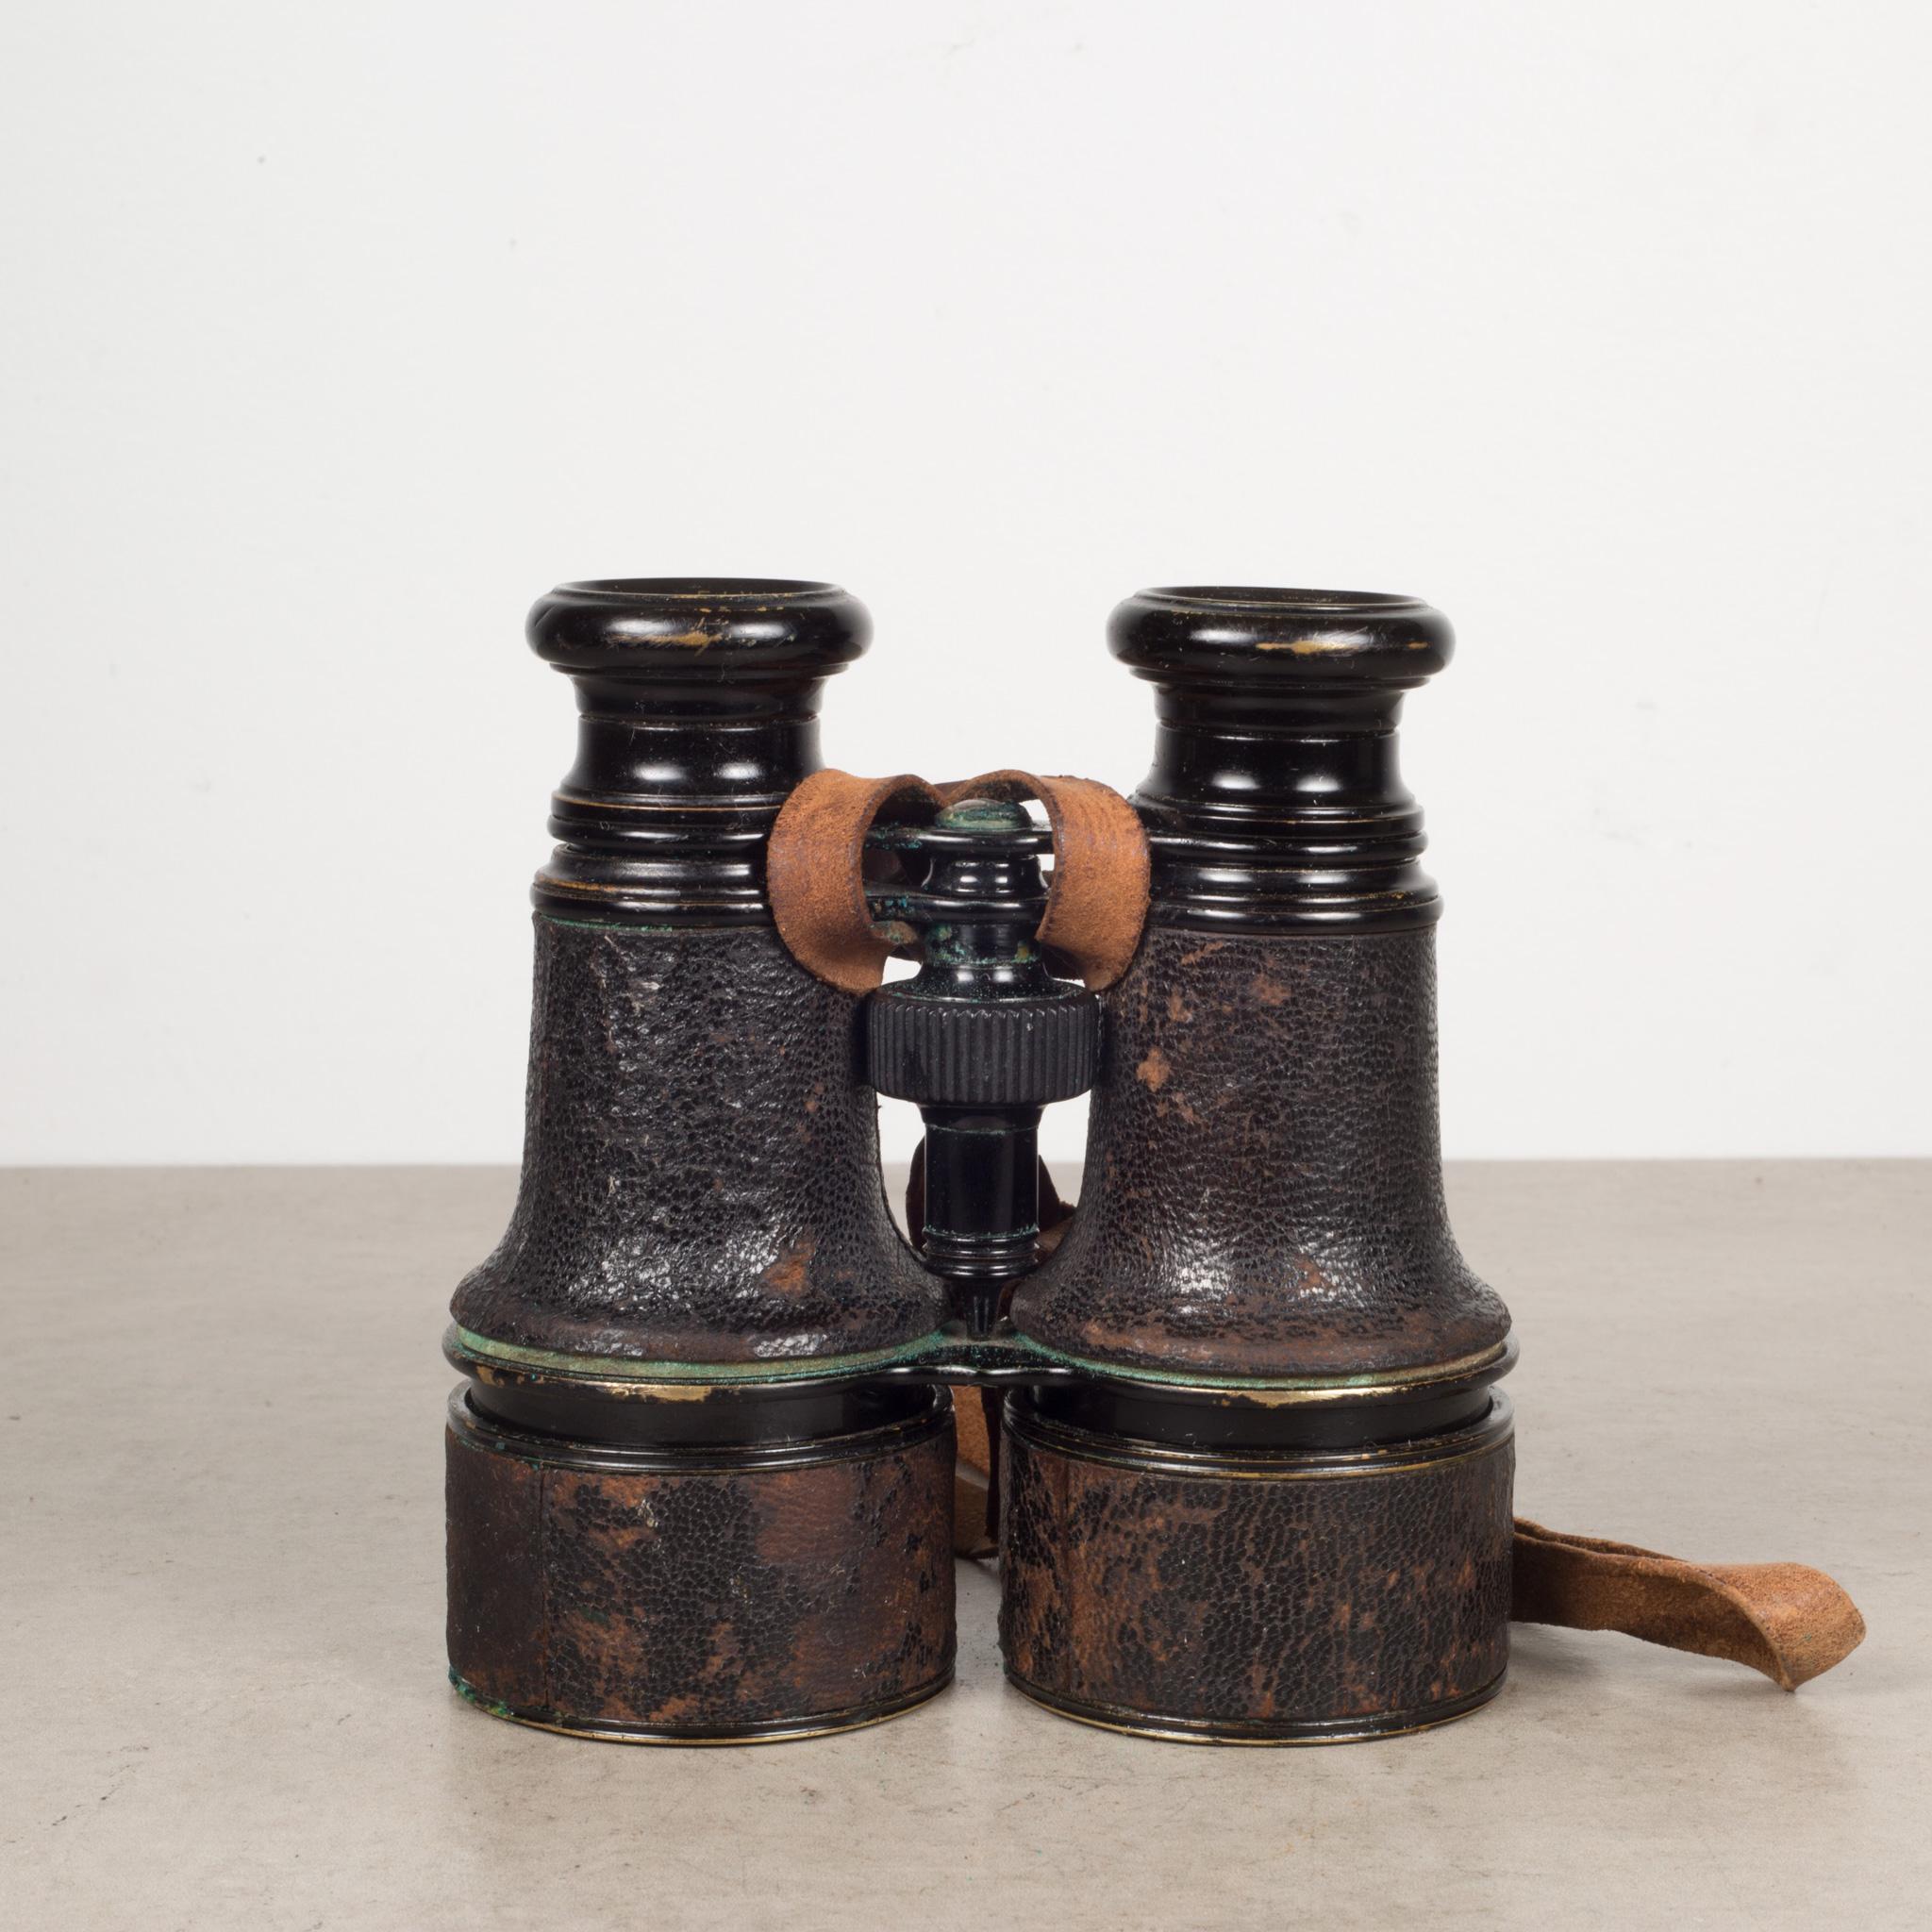 About

This is an original pair of leather wrapped expandable binoculars. 